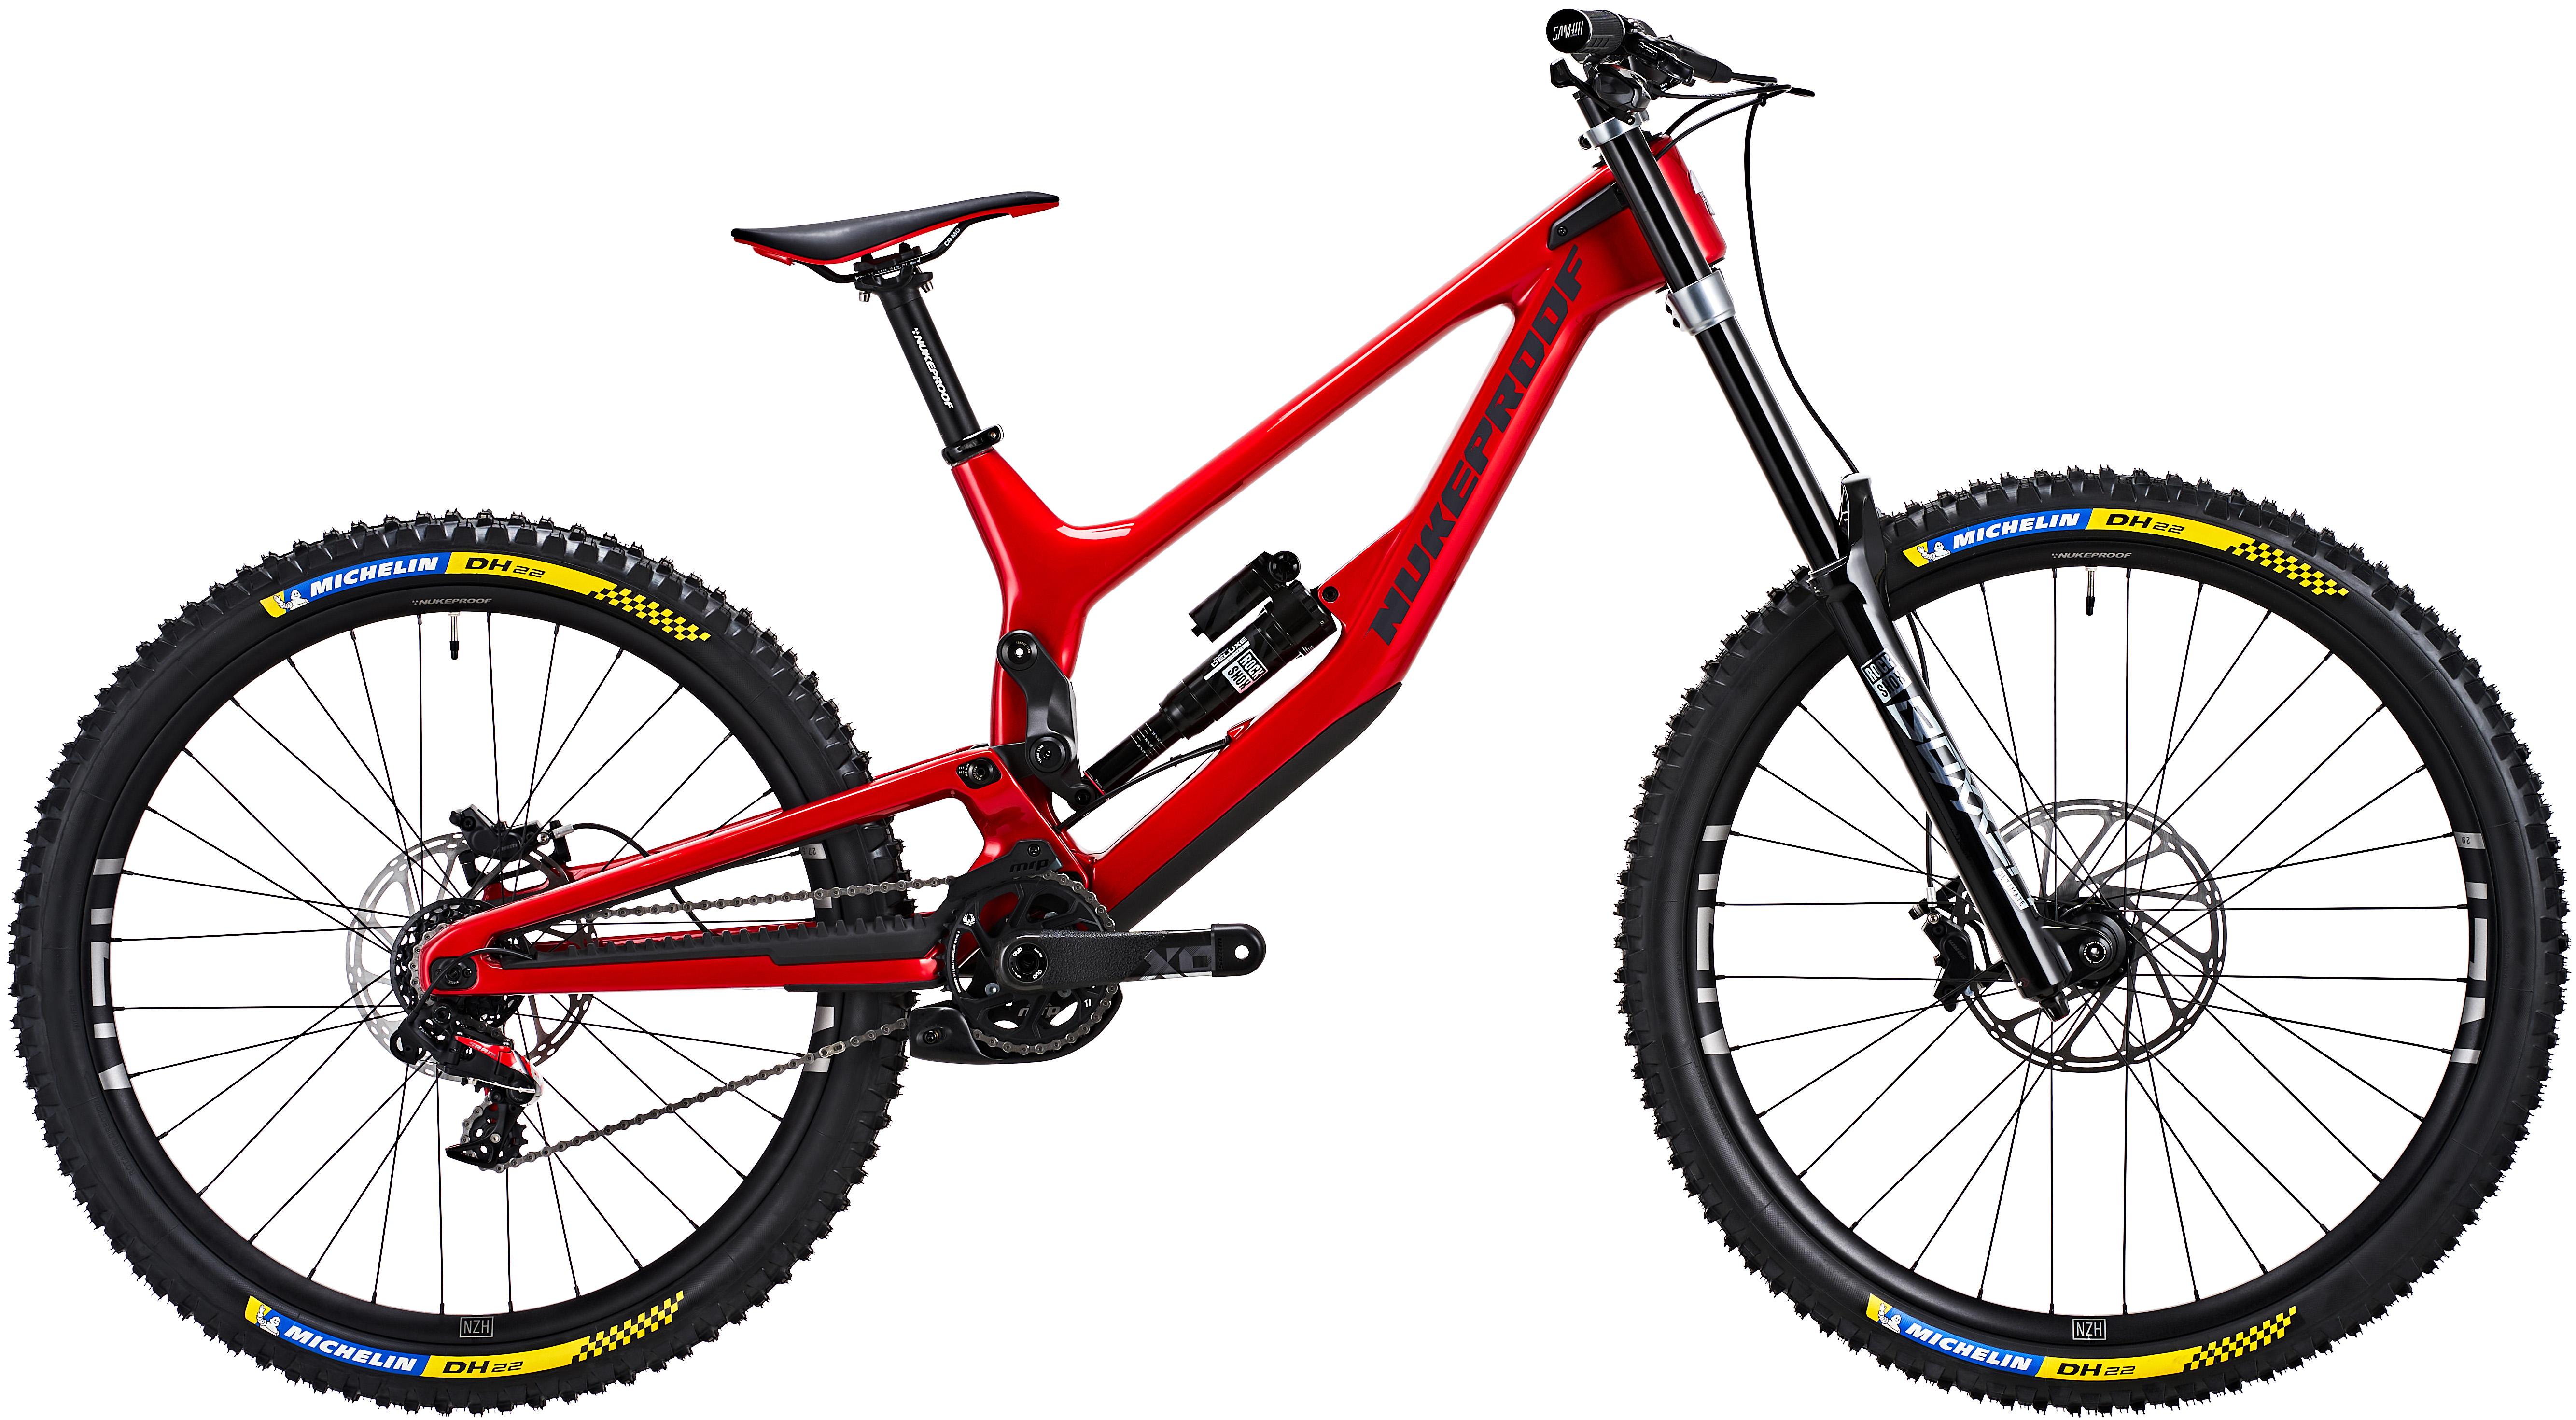 Nukeproof Dissent 297 Rs Carbon Mountain Bike (x01 Dh) - Racing Red